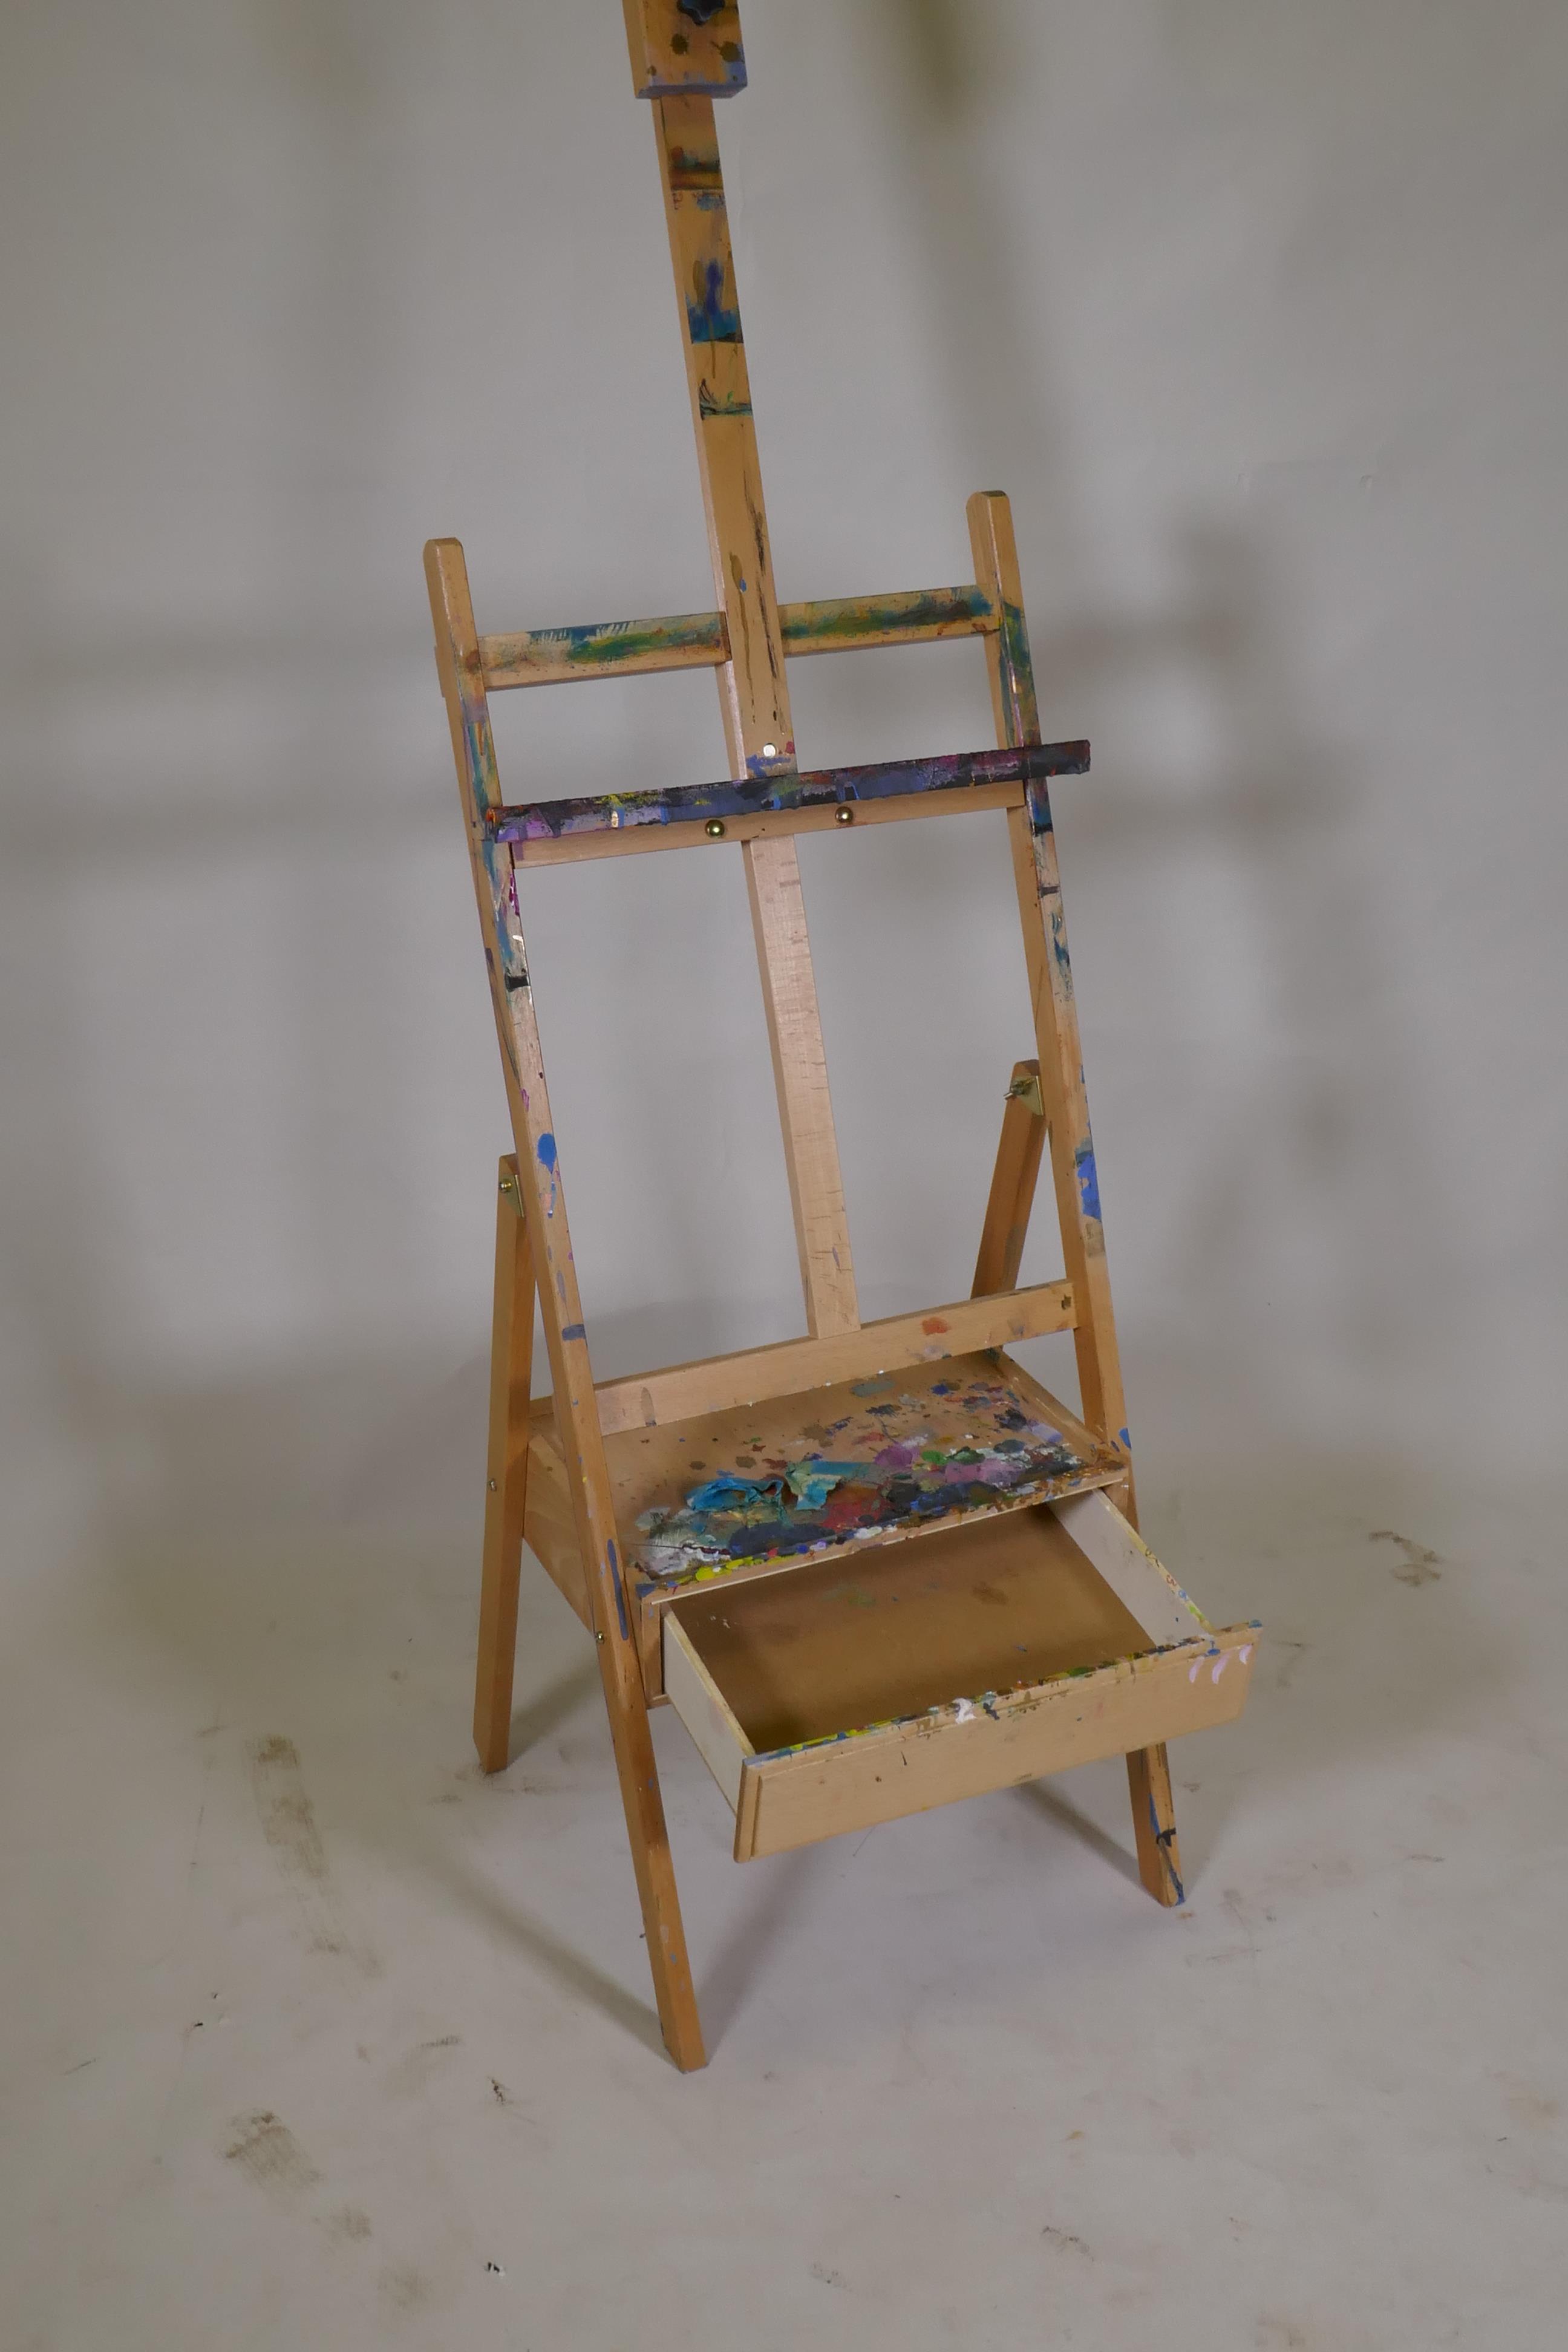 An artist's adjustable easel with single drawer, 190cm high - Image 2 of 2